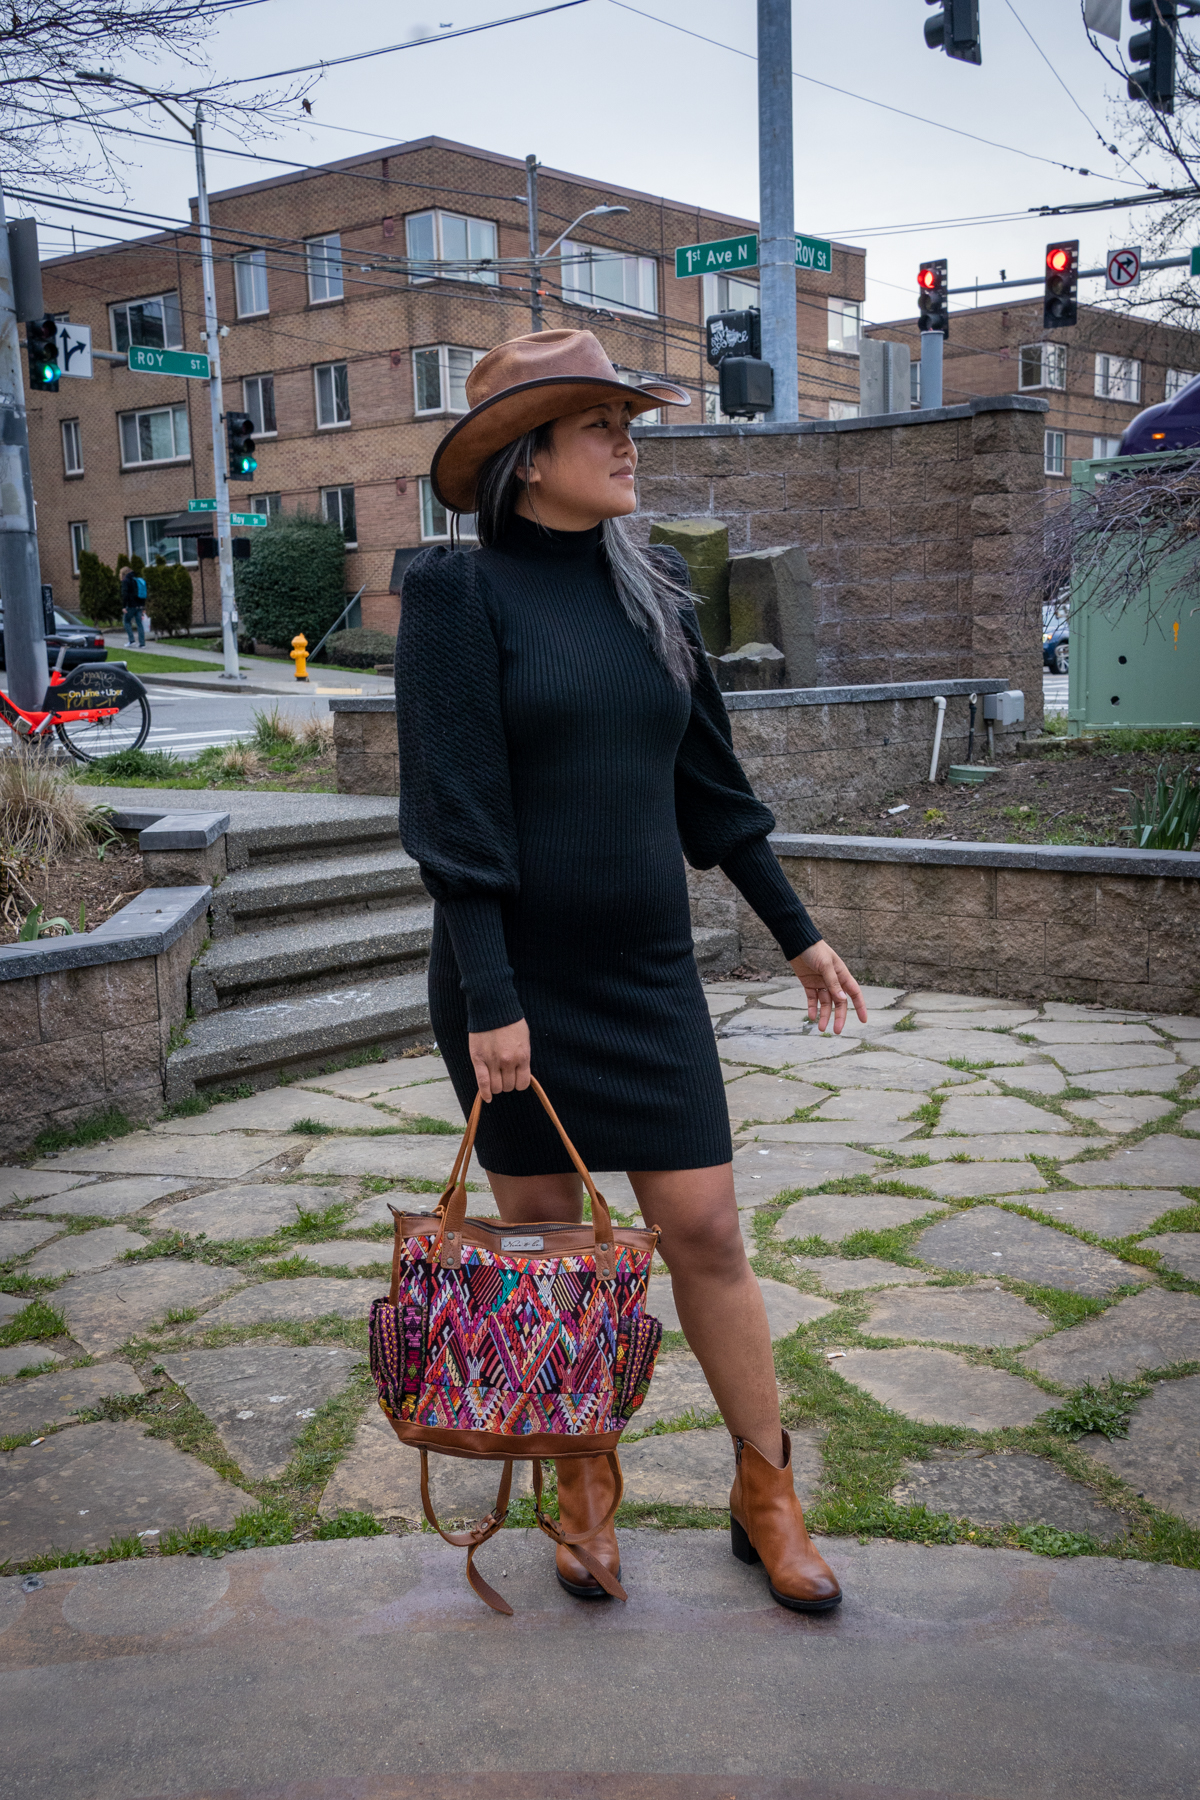 Nena and Co Review convertible day bag cdb carried as tote american hat makers alice and olivia dress clarks booties